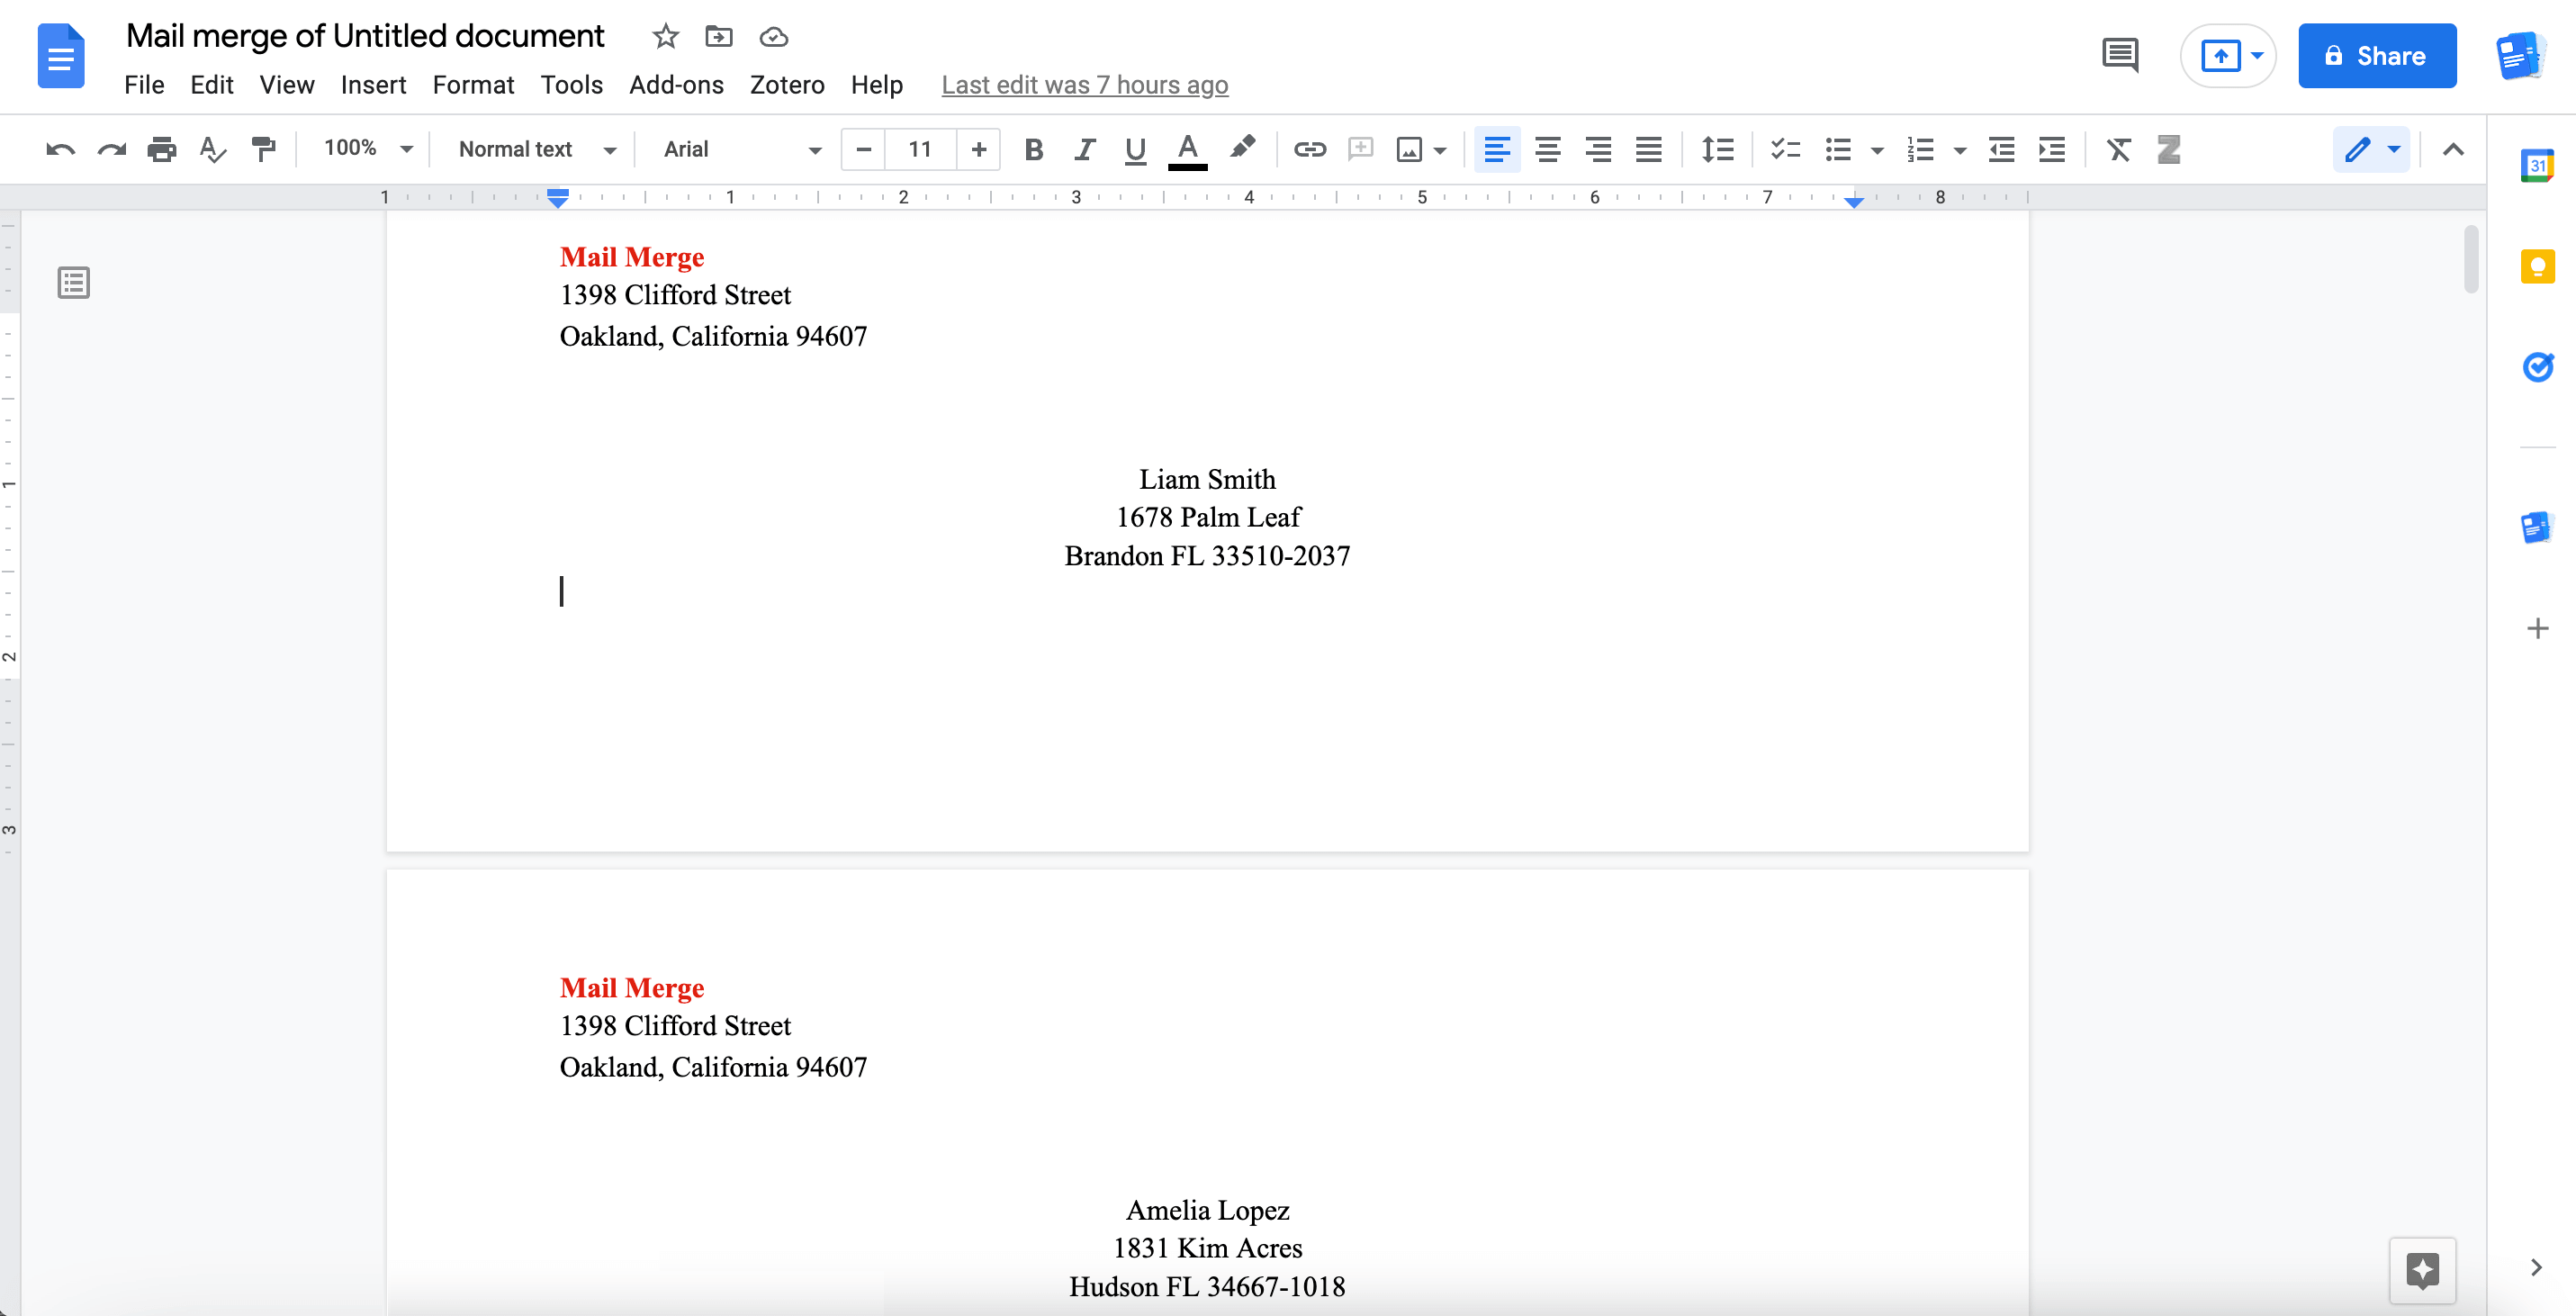 How to print an envelope in Google Docs?